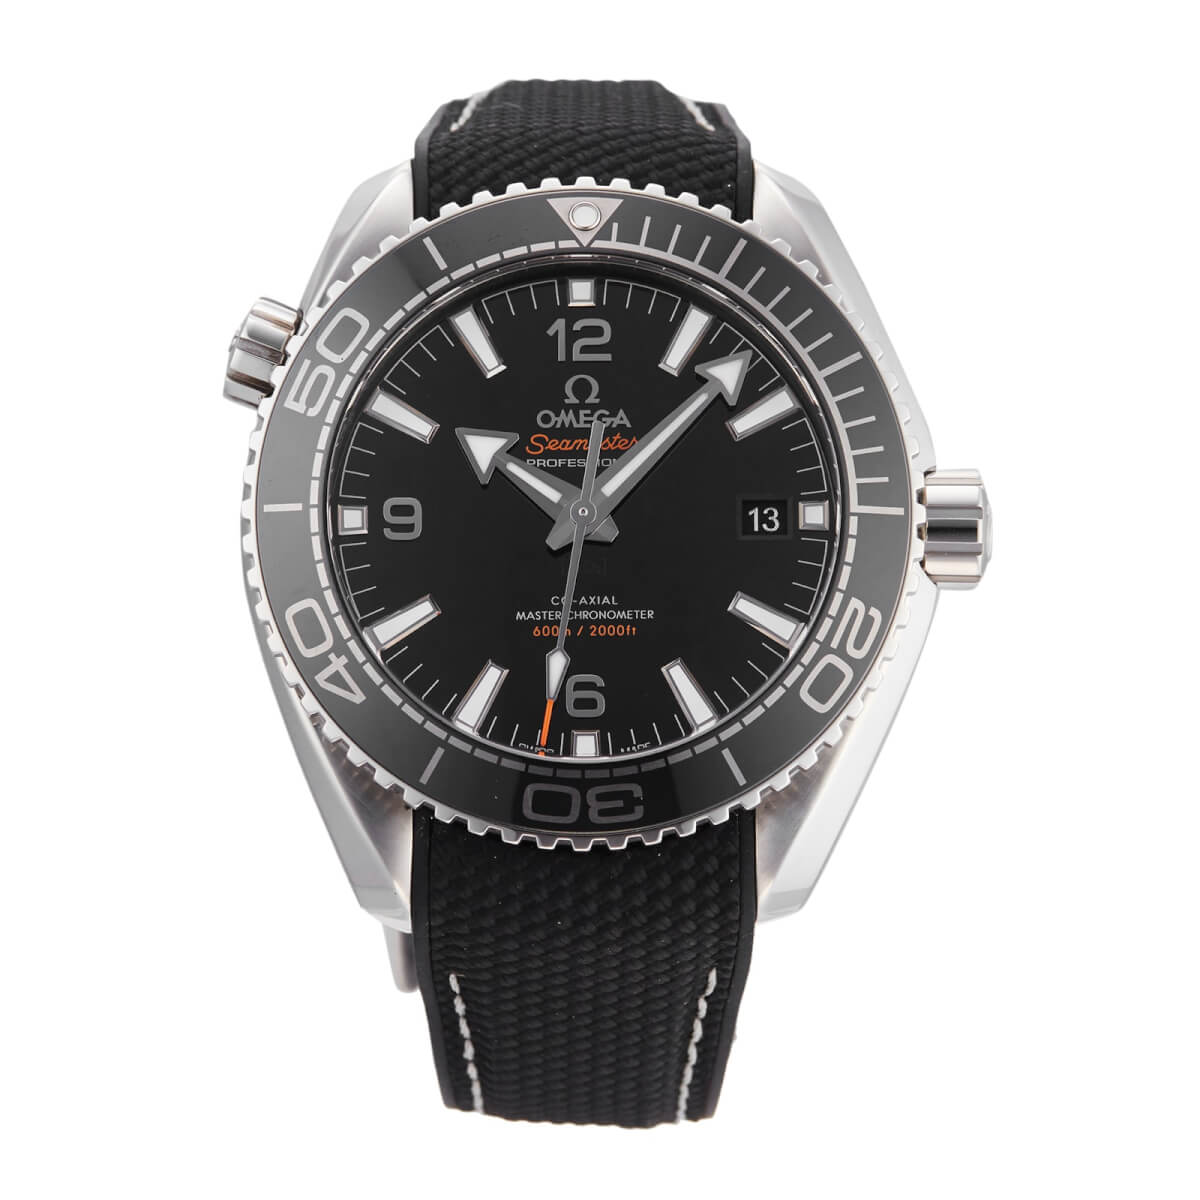 Pre-Owned Omega Seamaster Planet Ocean 600M Mens Watch 215.33.44.21.01.001